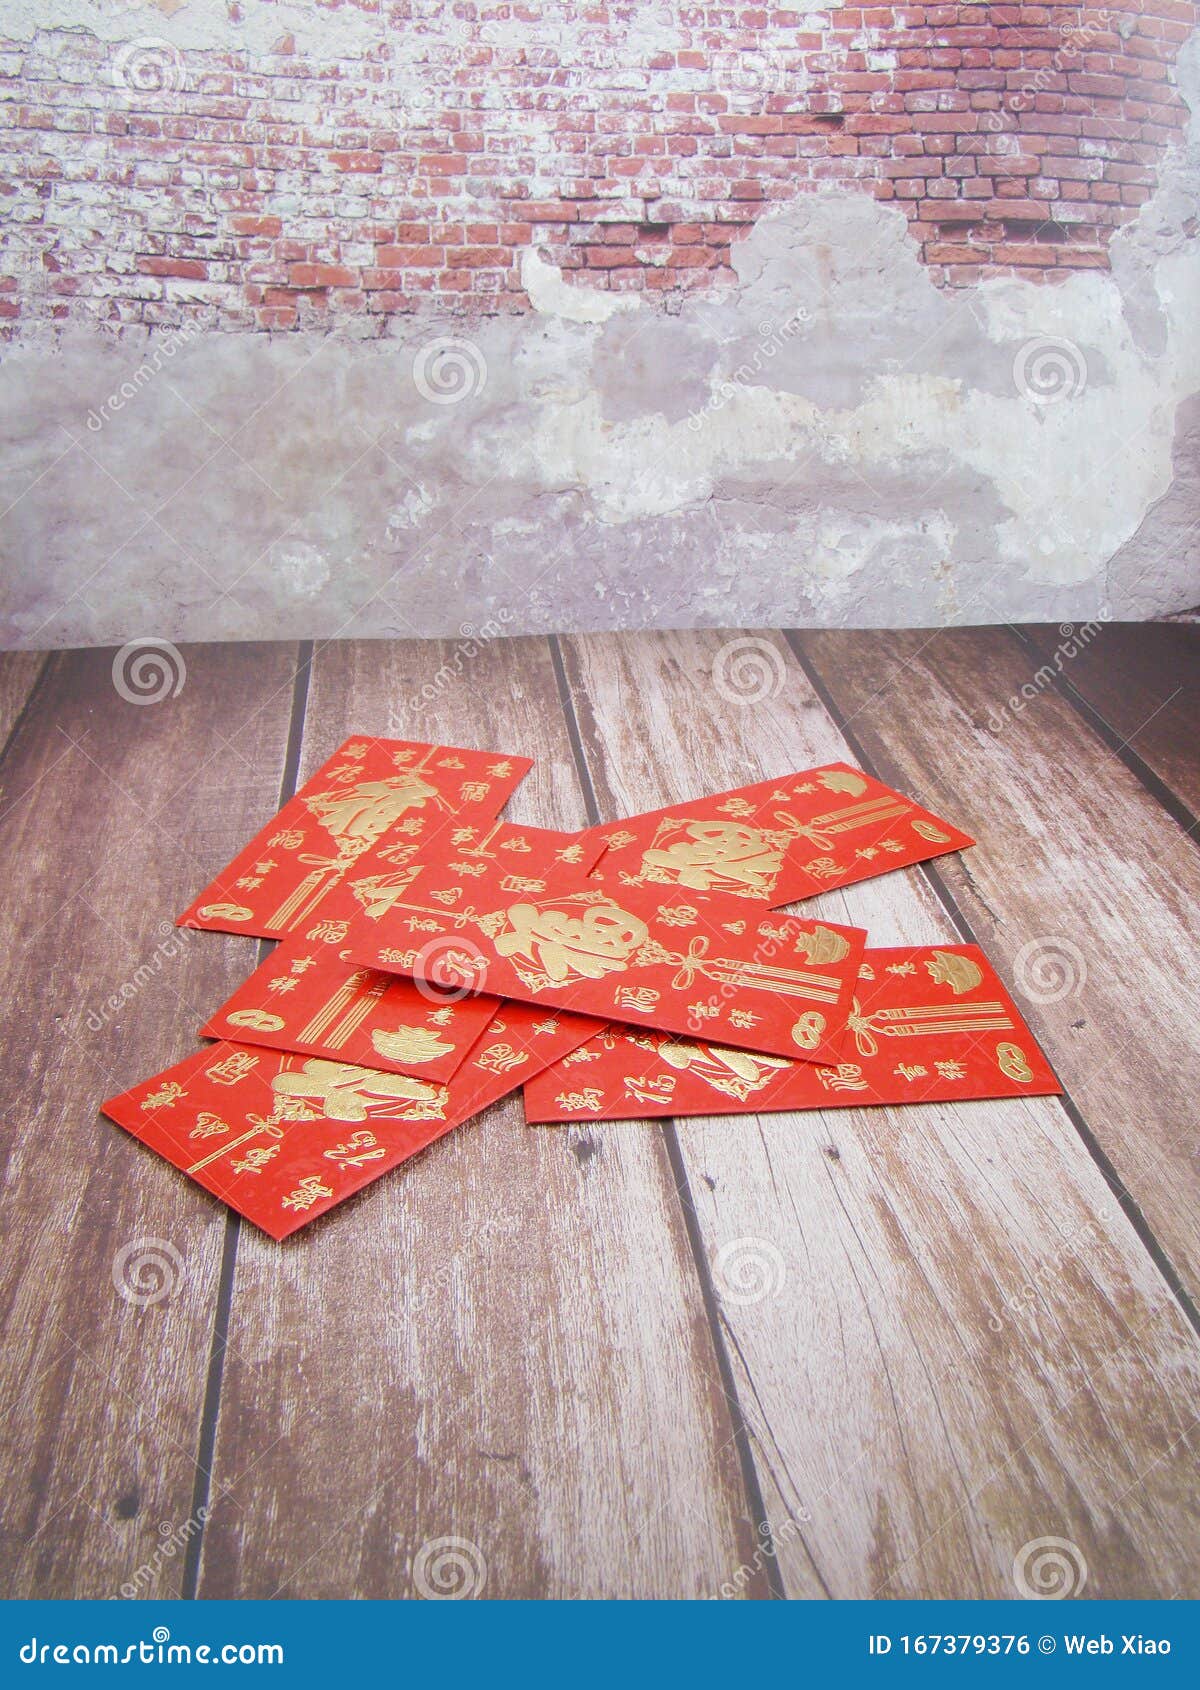 Chinese Red Envelopes for All Occasions